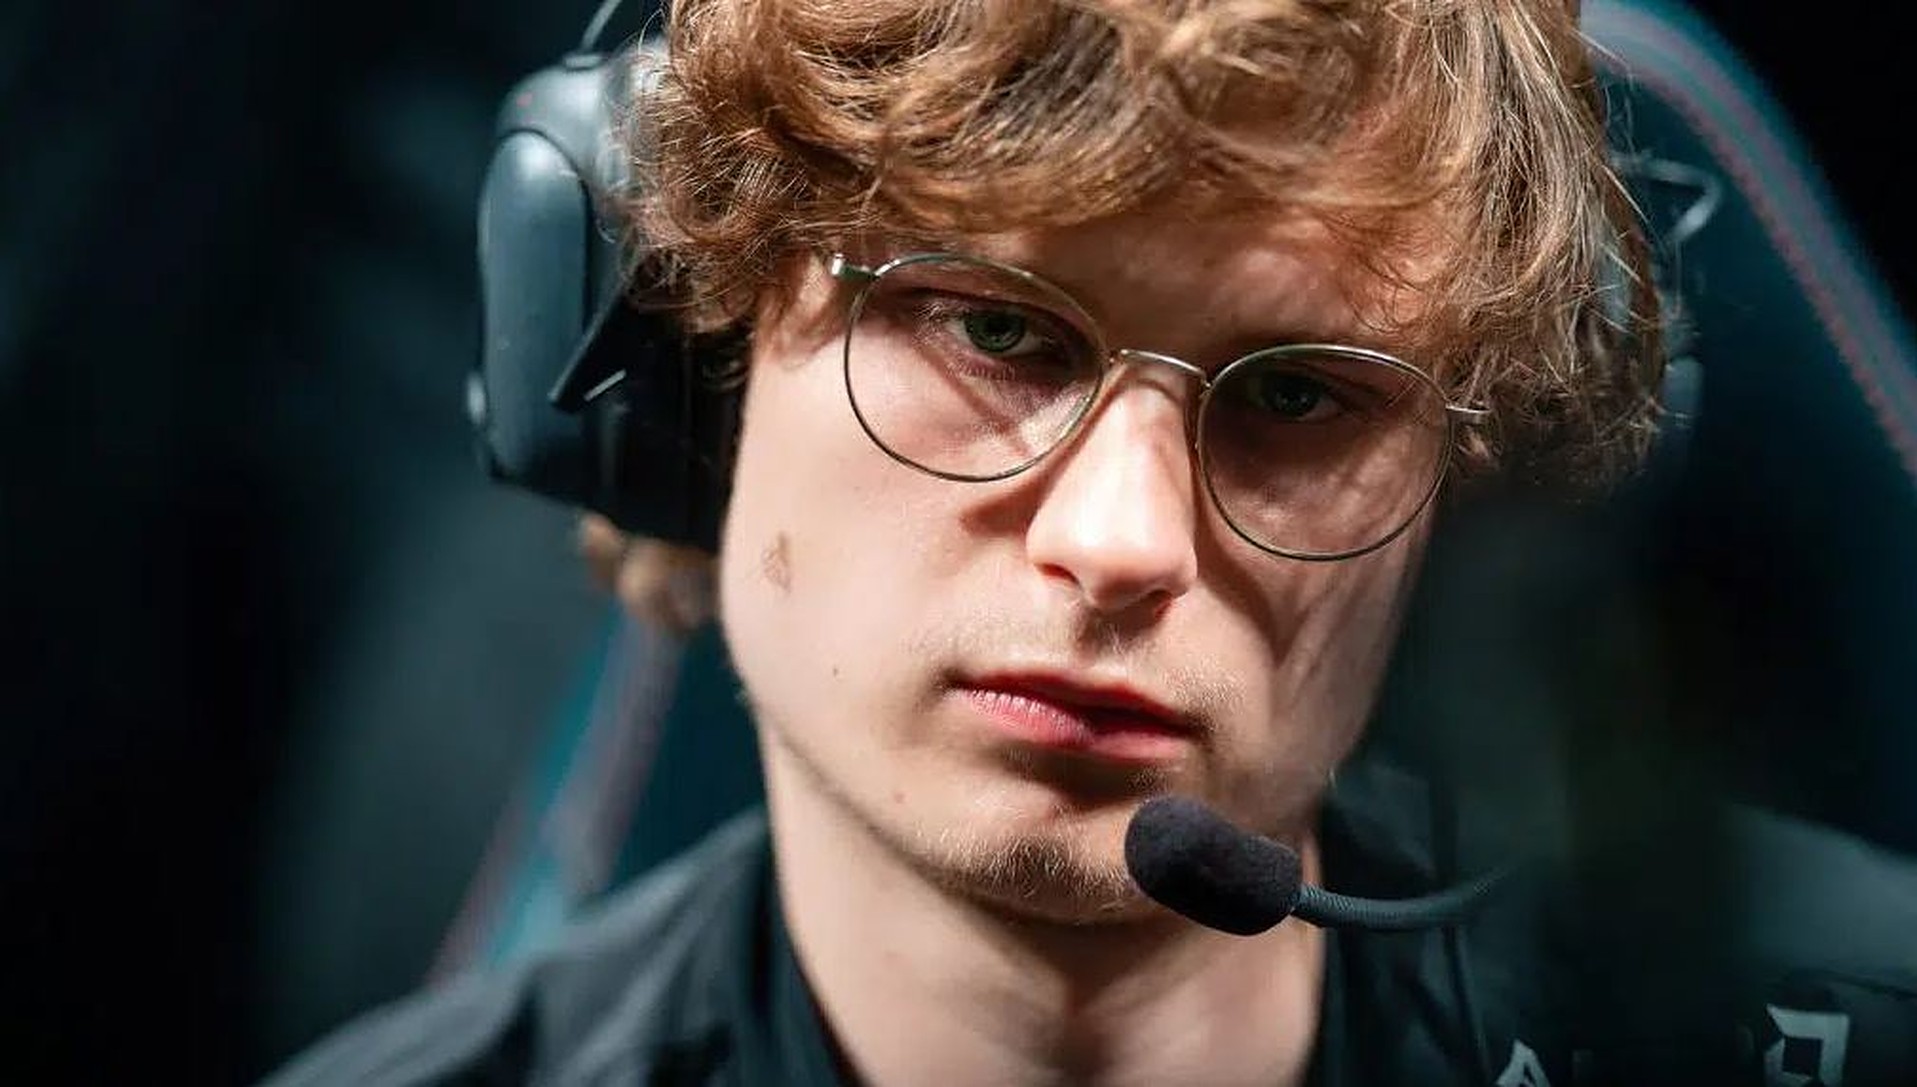 LoL: The German hope for the Worlds 2022 gives an interview - It doesn't sound good for fans of Fnatic